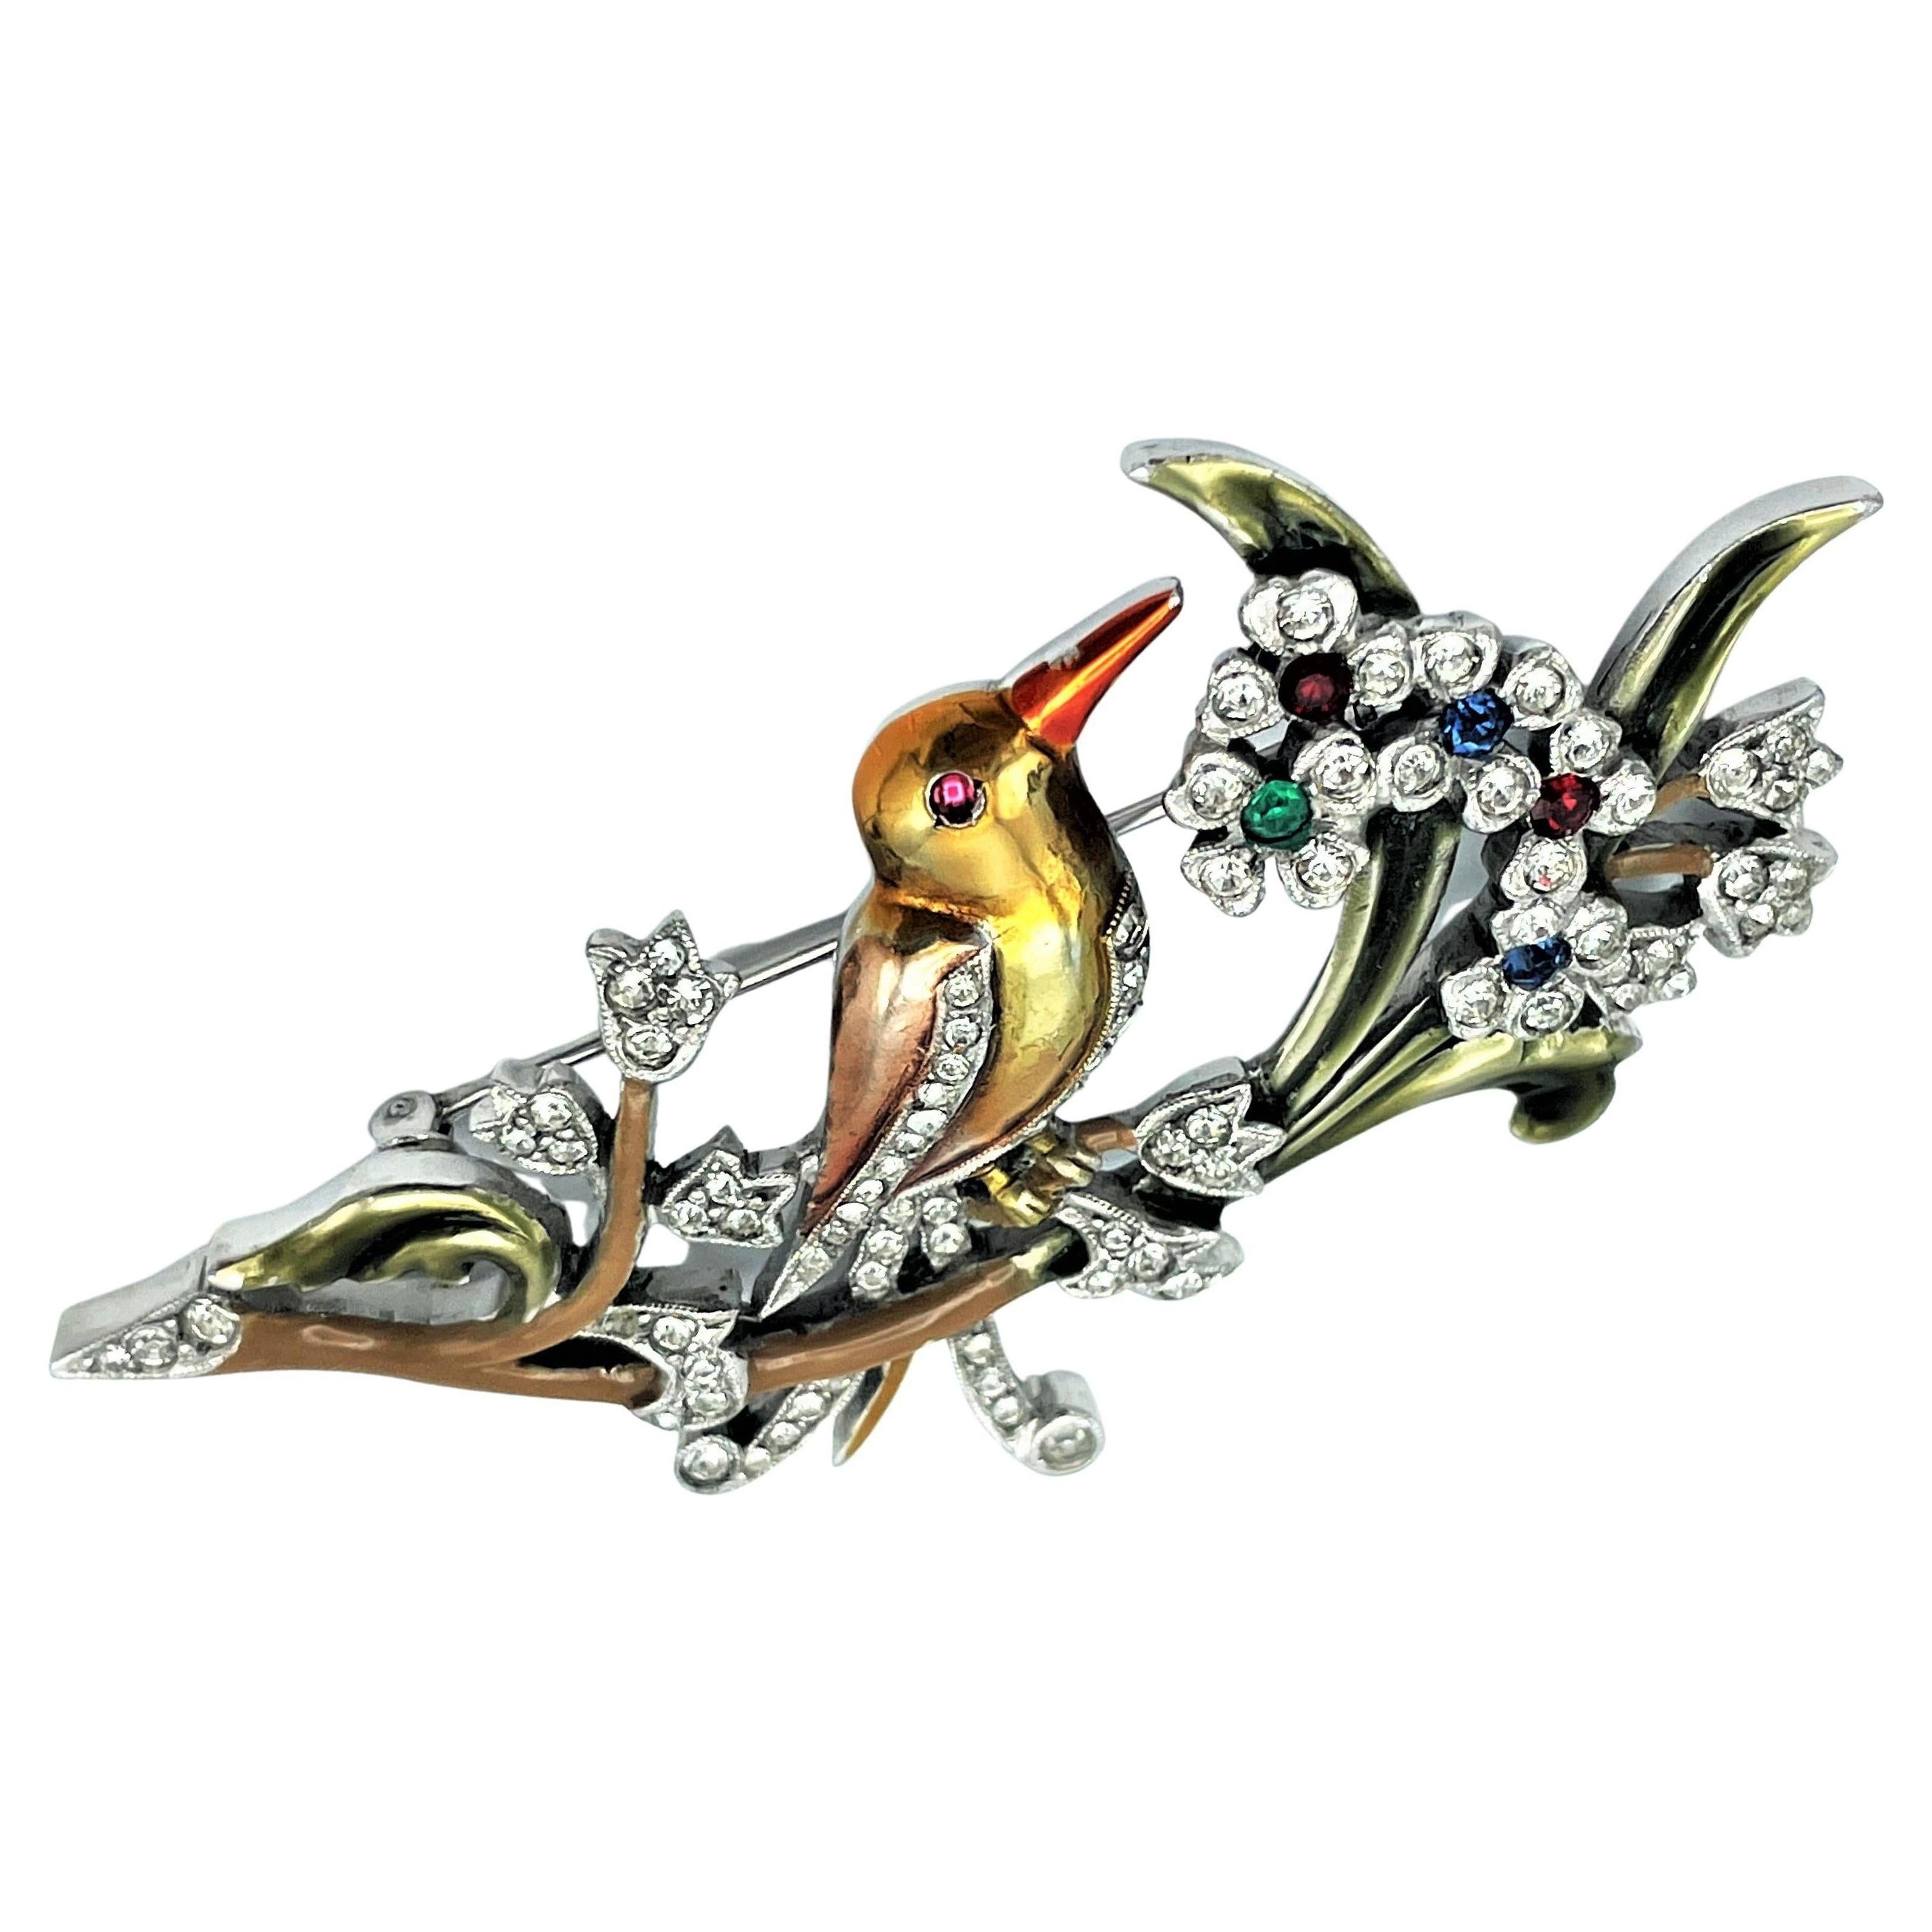 DUJAY unsigned metallic enamel brooch, bird on the branches, 1940s USA 